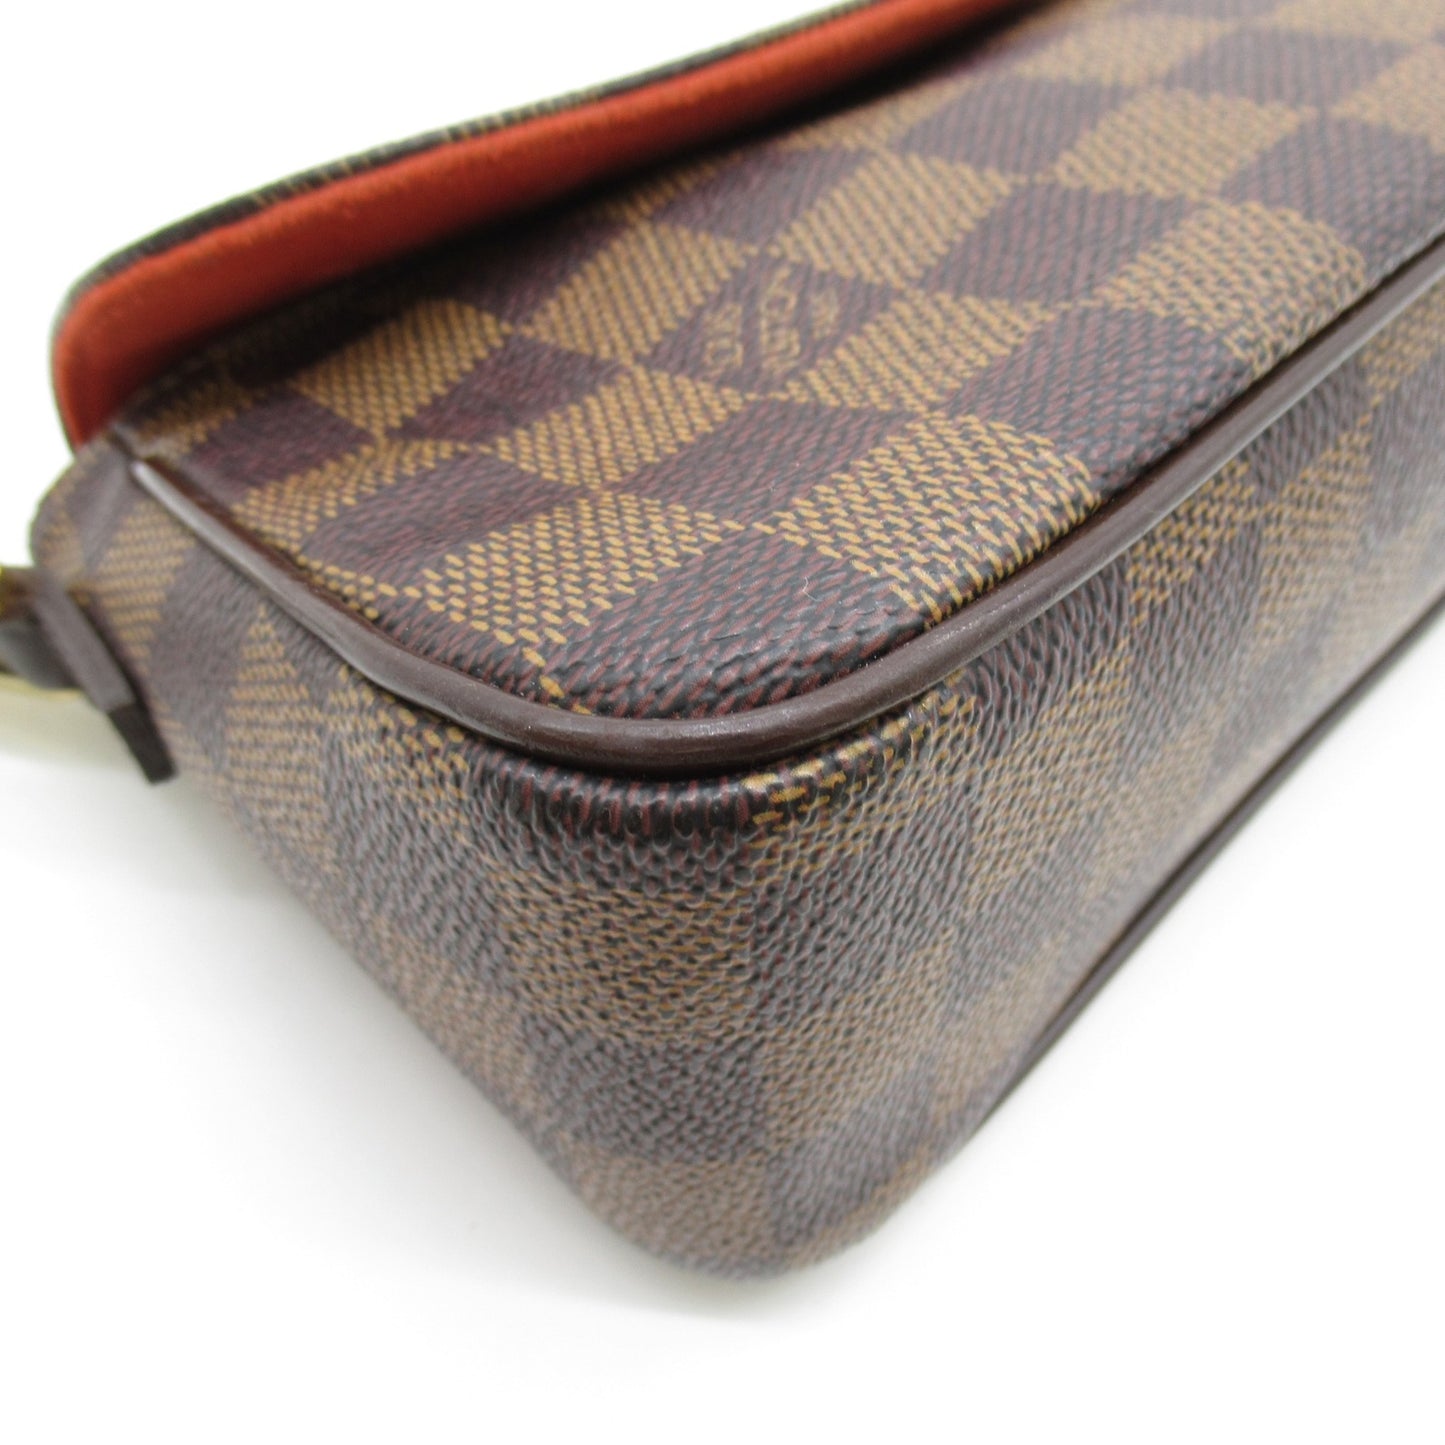 Louis Vuitton Women's Luxurious Canvas Shoulder Bag with Timeless Elegance in Brown